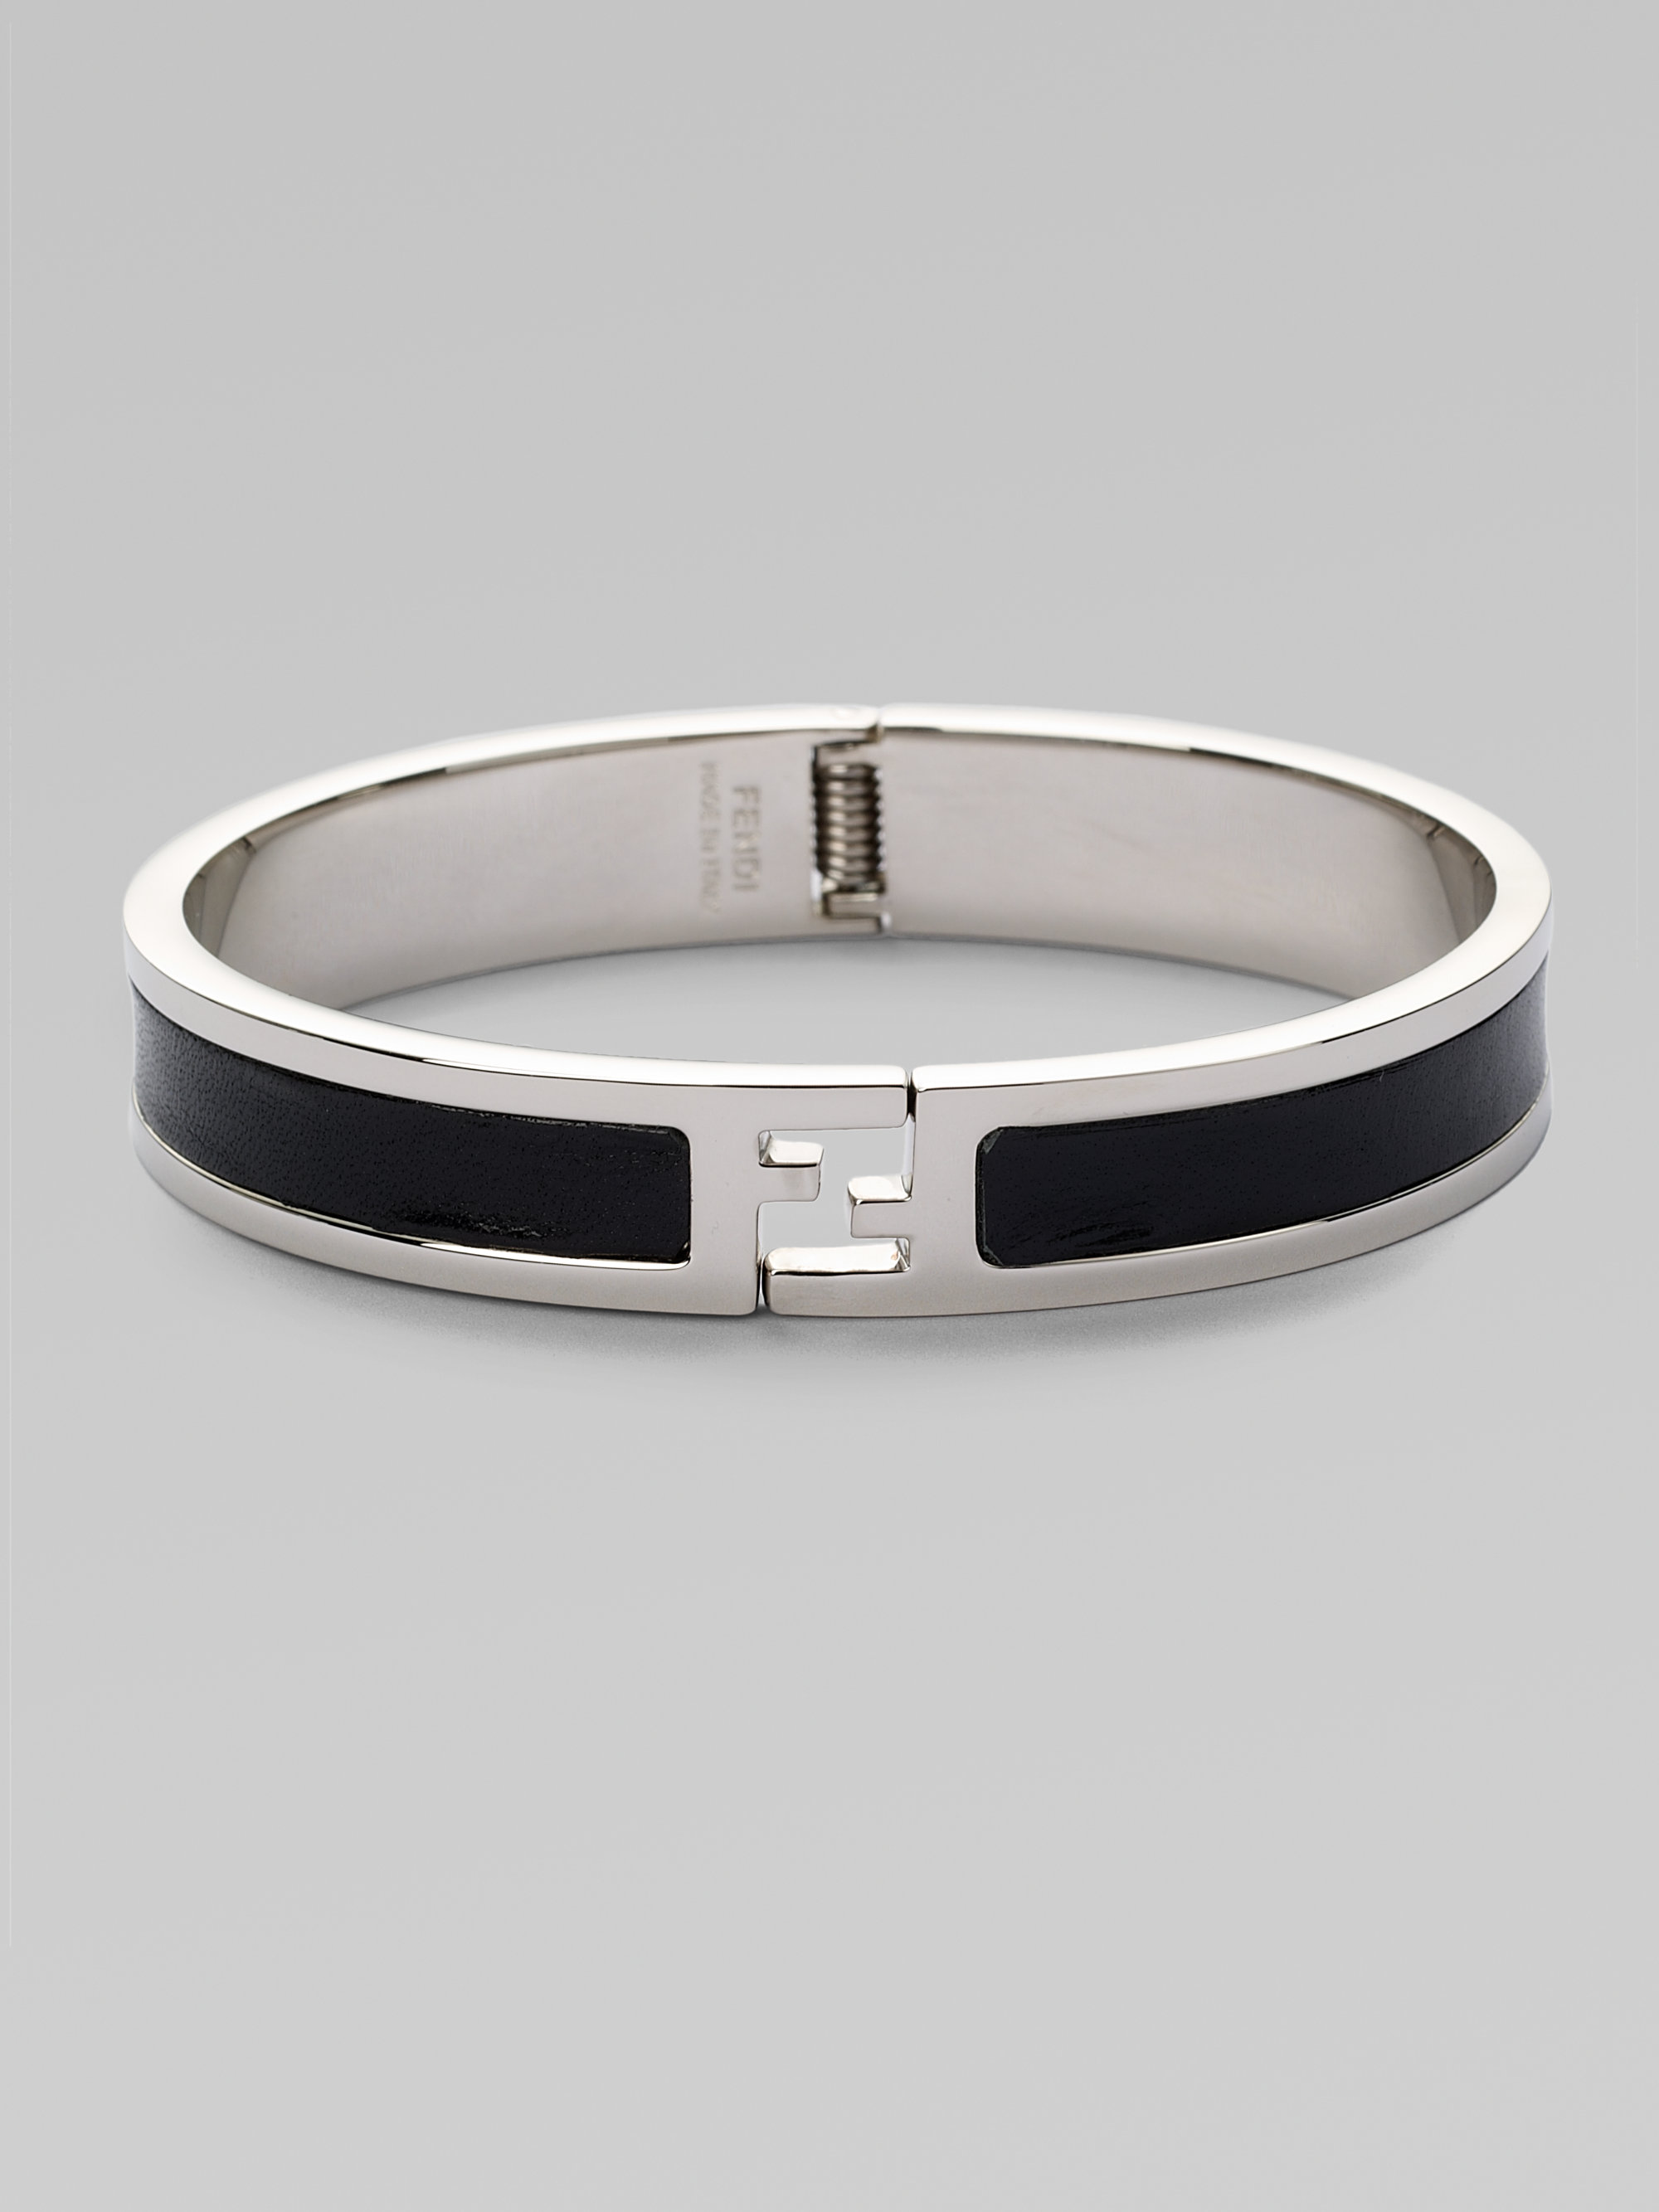 Fendi Metal and Leather Bracelet in 